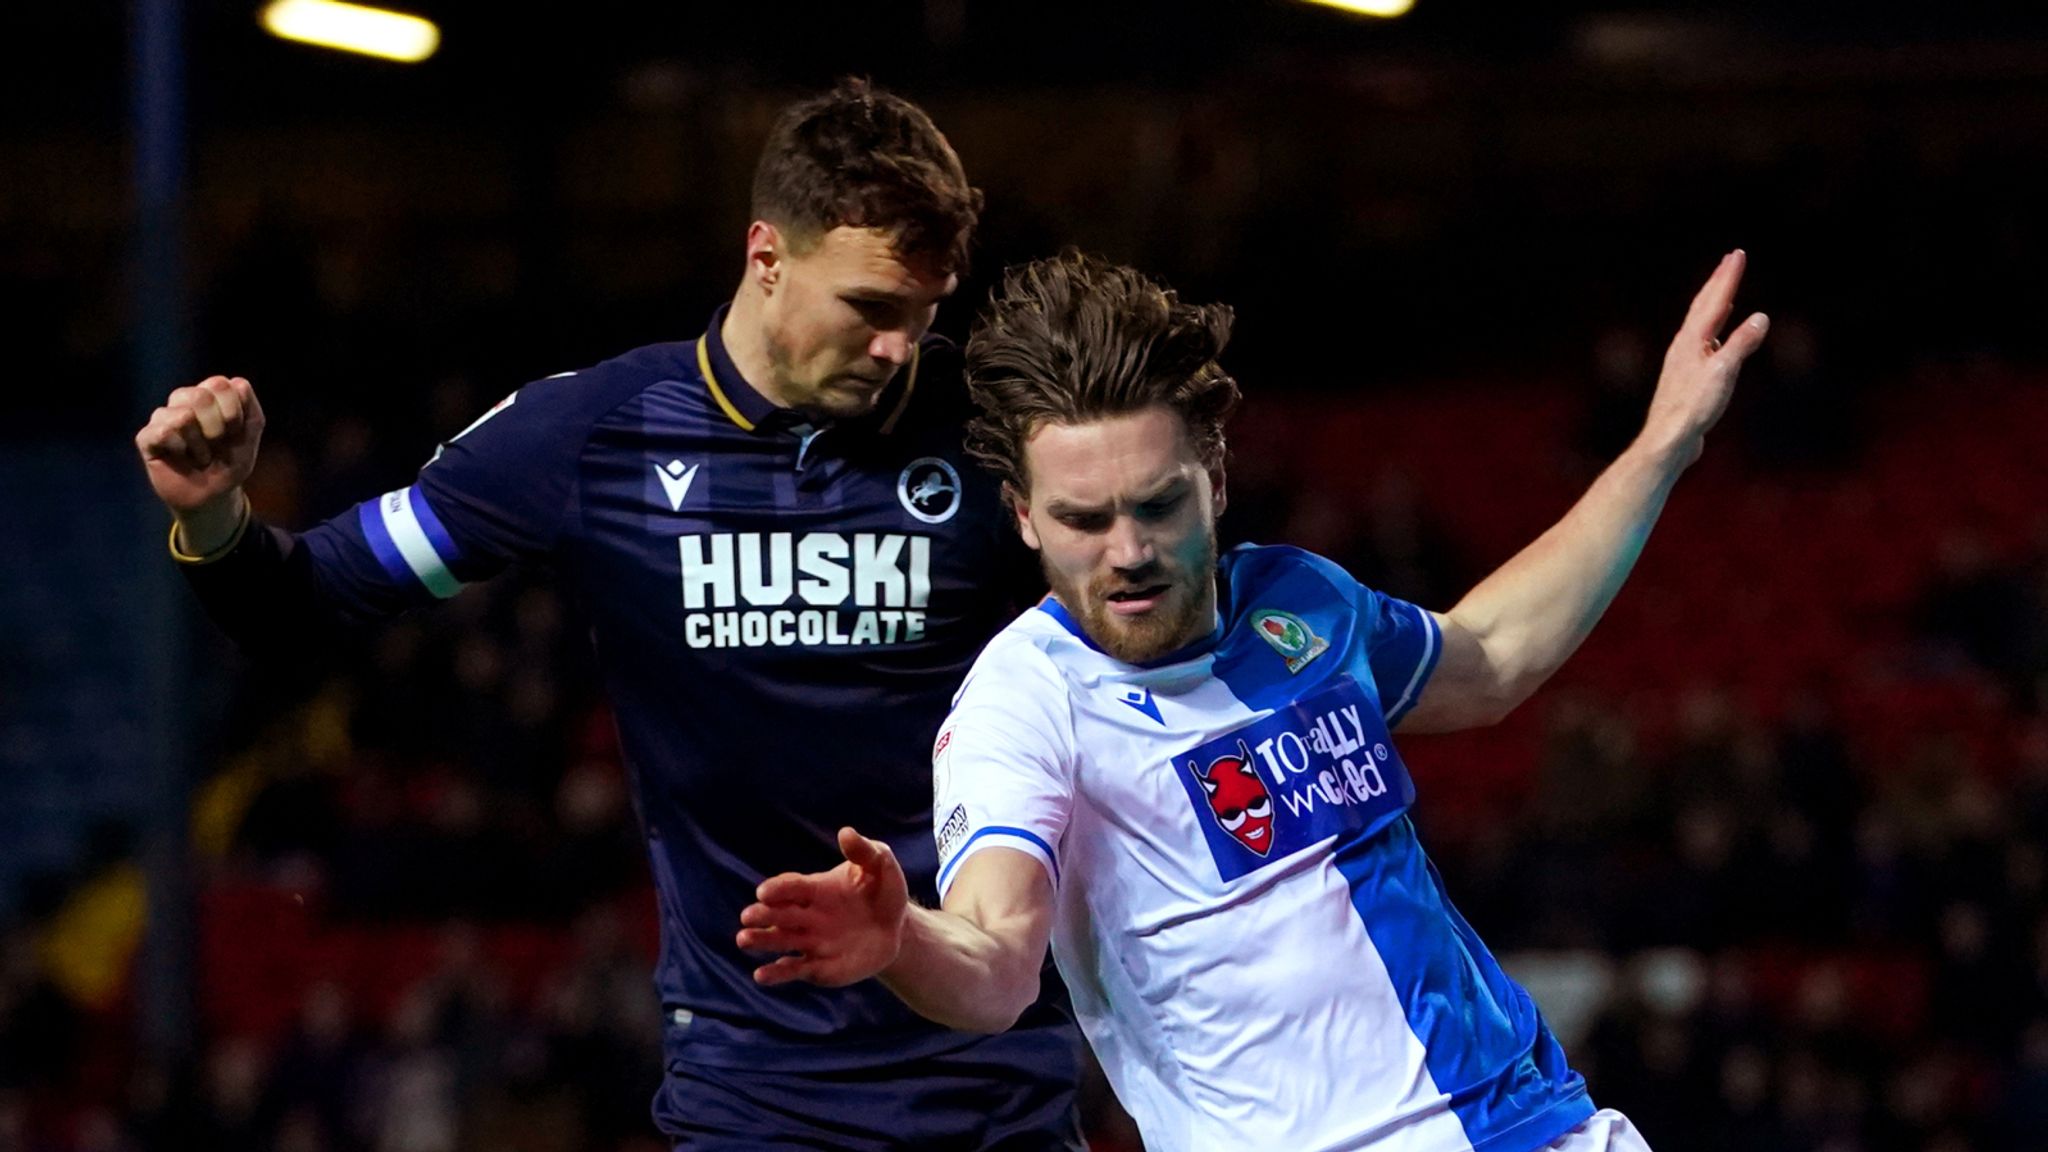 How do Millwall's fixtures compare to Blackburn, Coventry and Sunderland as  they aim to hold onto top-six spot?